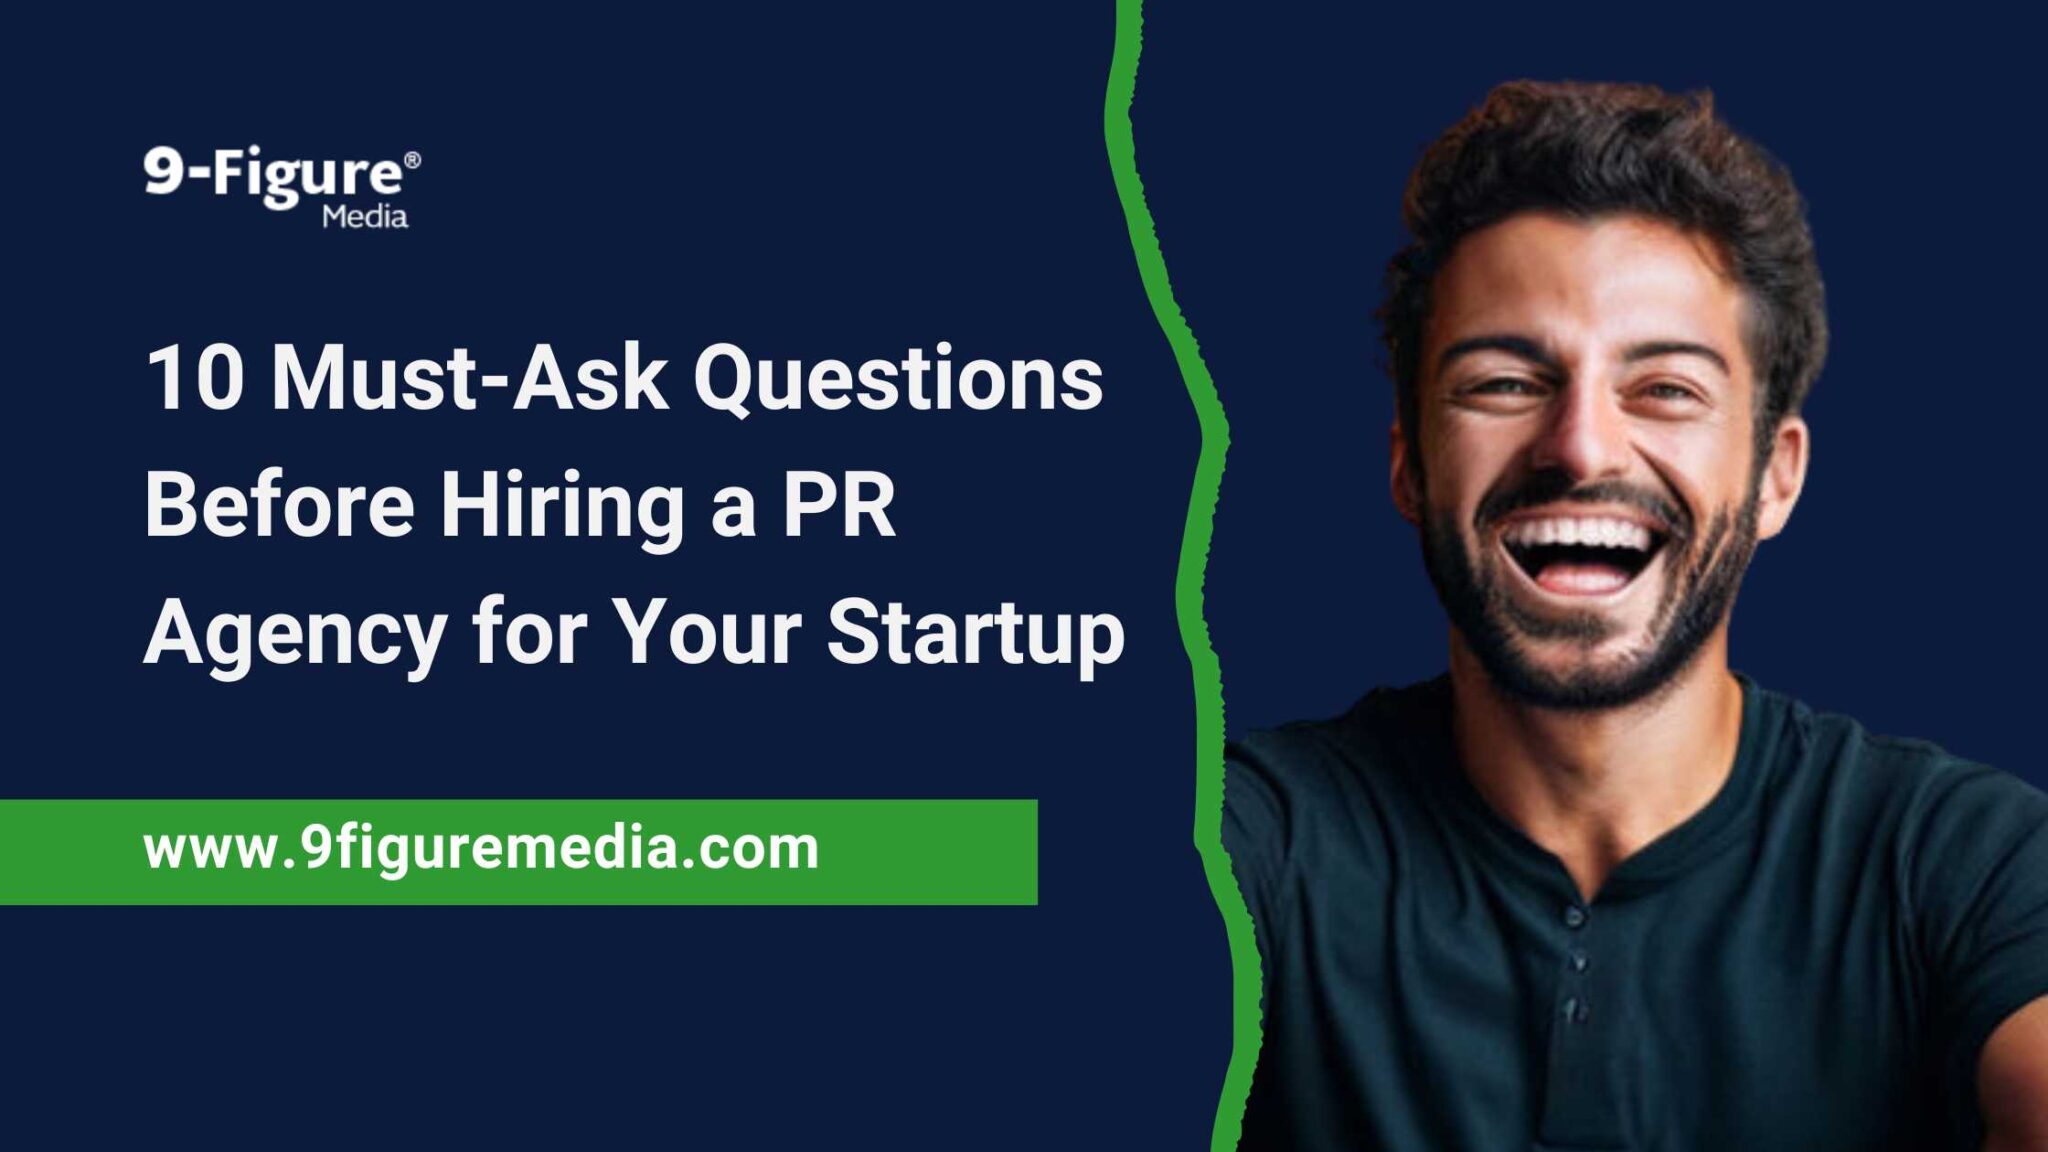 10 Must-Ask Questions Before Hiring a PR Agency for Your Startup